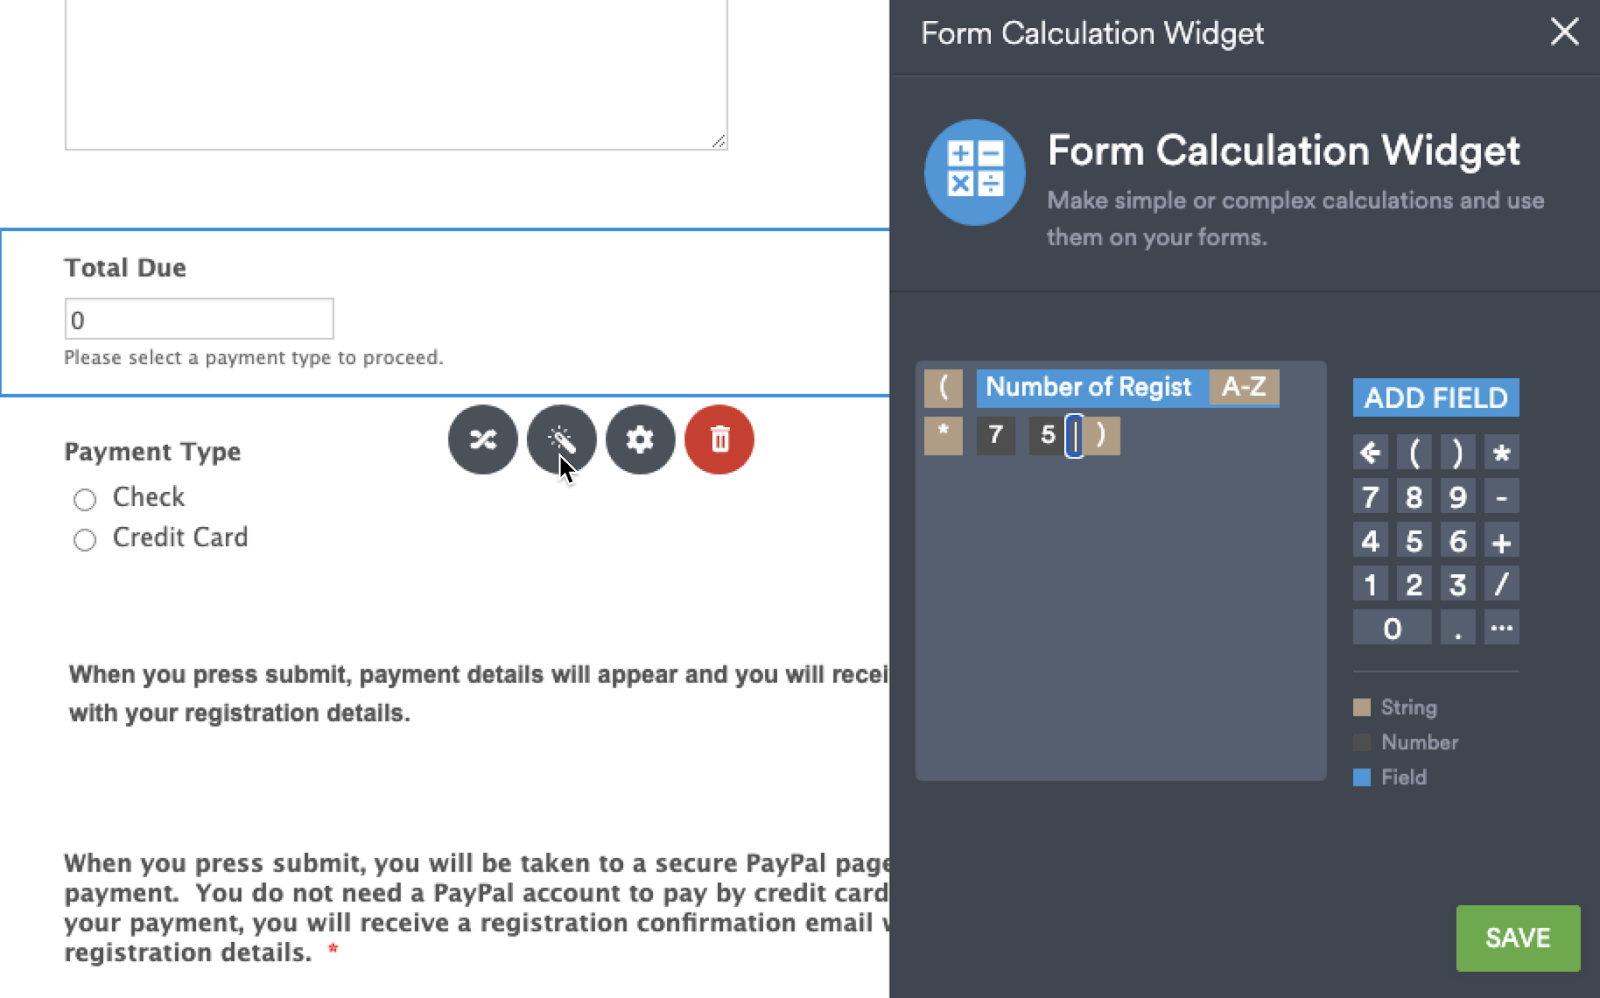 Screenshot of Jotform website, showing the "Total Due" and "Payment type" fields on the left.  The "Form Calculation Widget attached to "Total due" is on the right.  There is a field for entering in the formula "(Number of Regist A-Z * 75) using the "add field" tools.  There is a green save button in the bottom right corner of the widget.